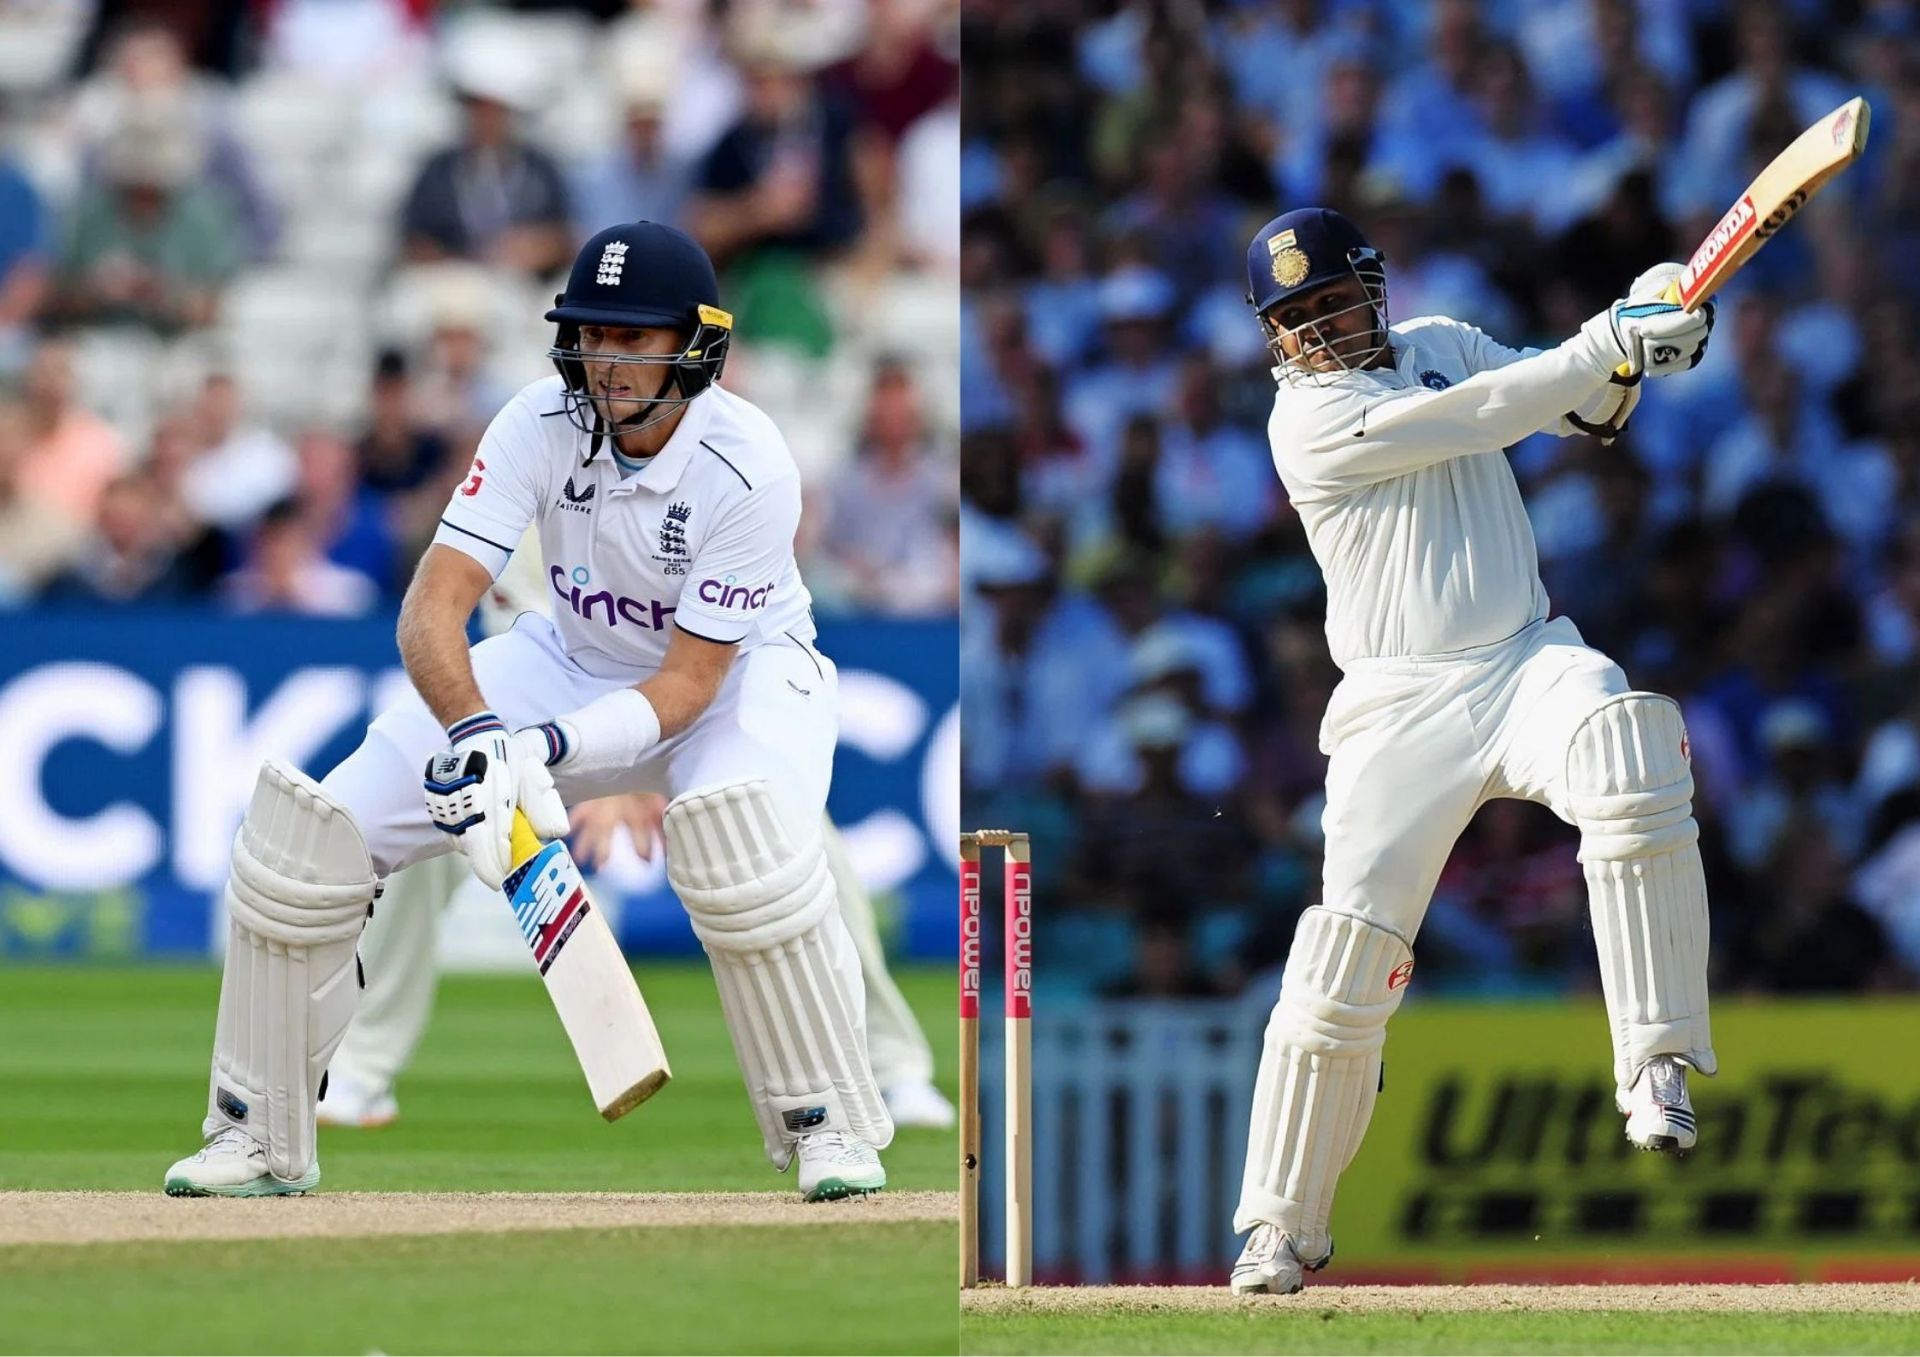 Joe Root has taken to the Bazball approach seamlessly but the likes of Virender Sehwag went the attacking route well before this era.